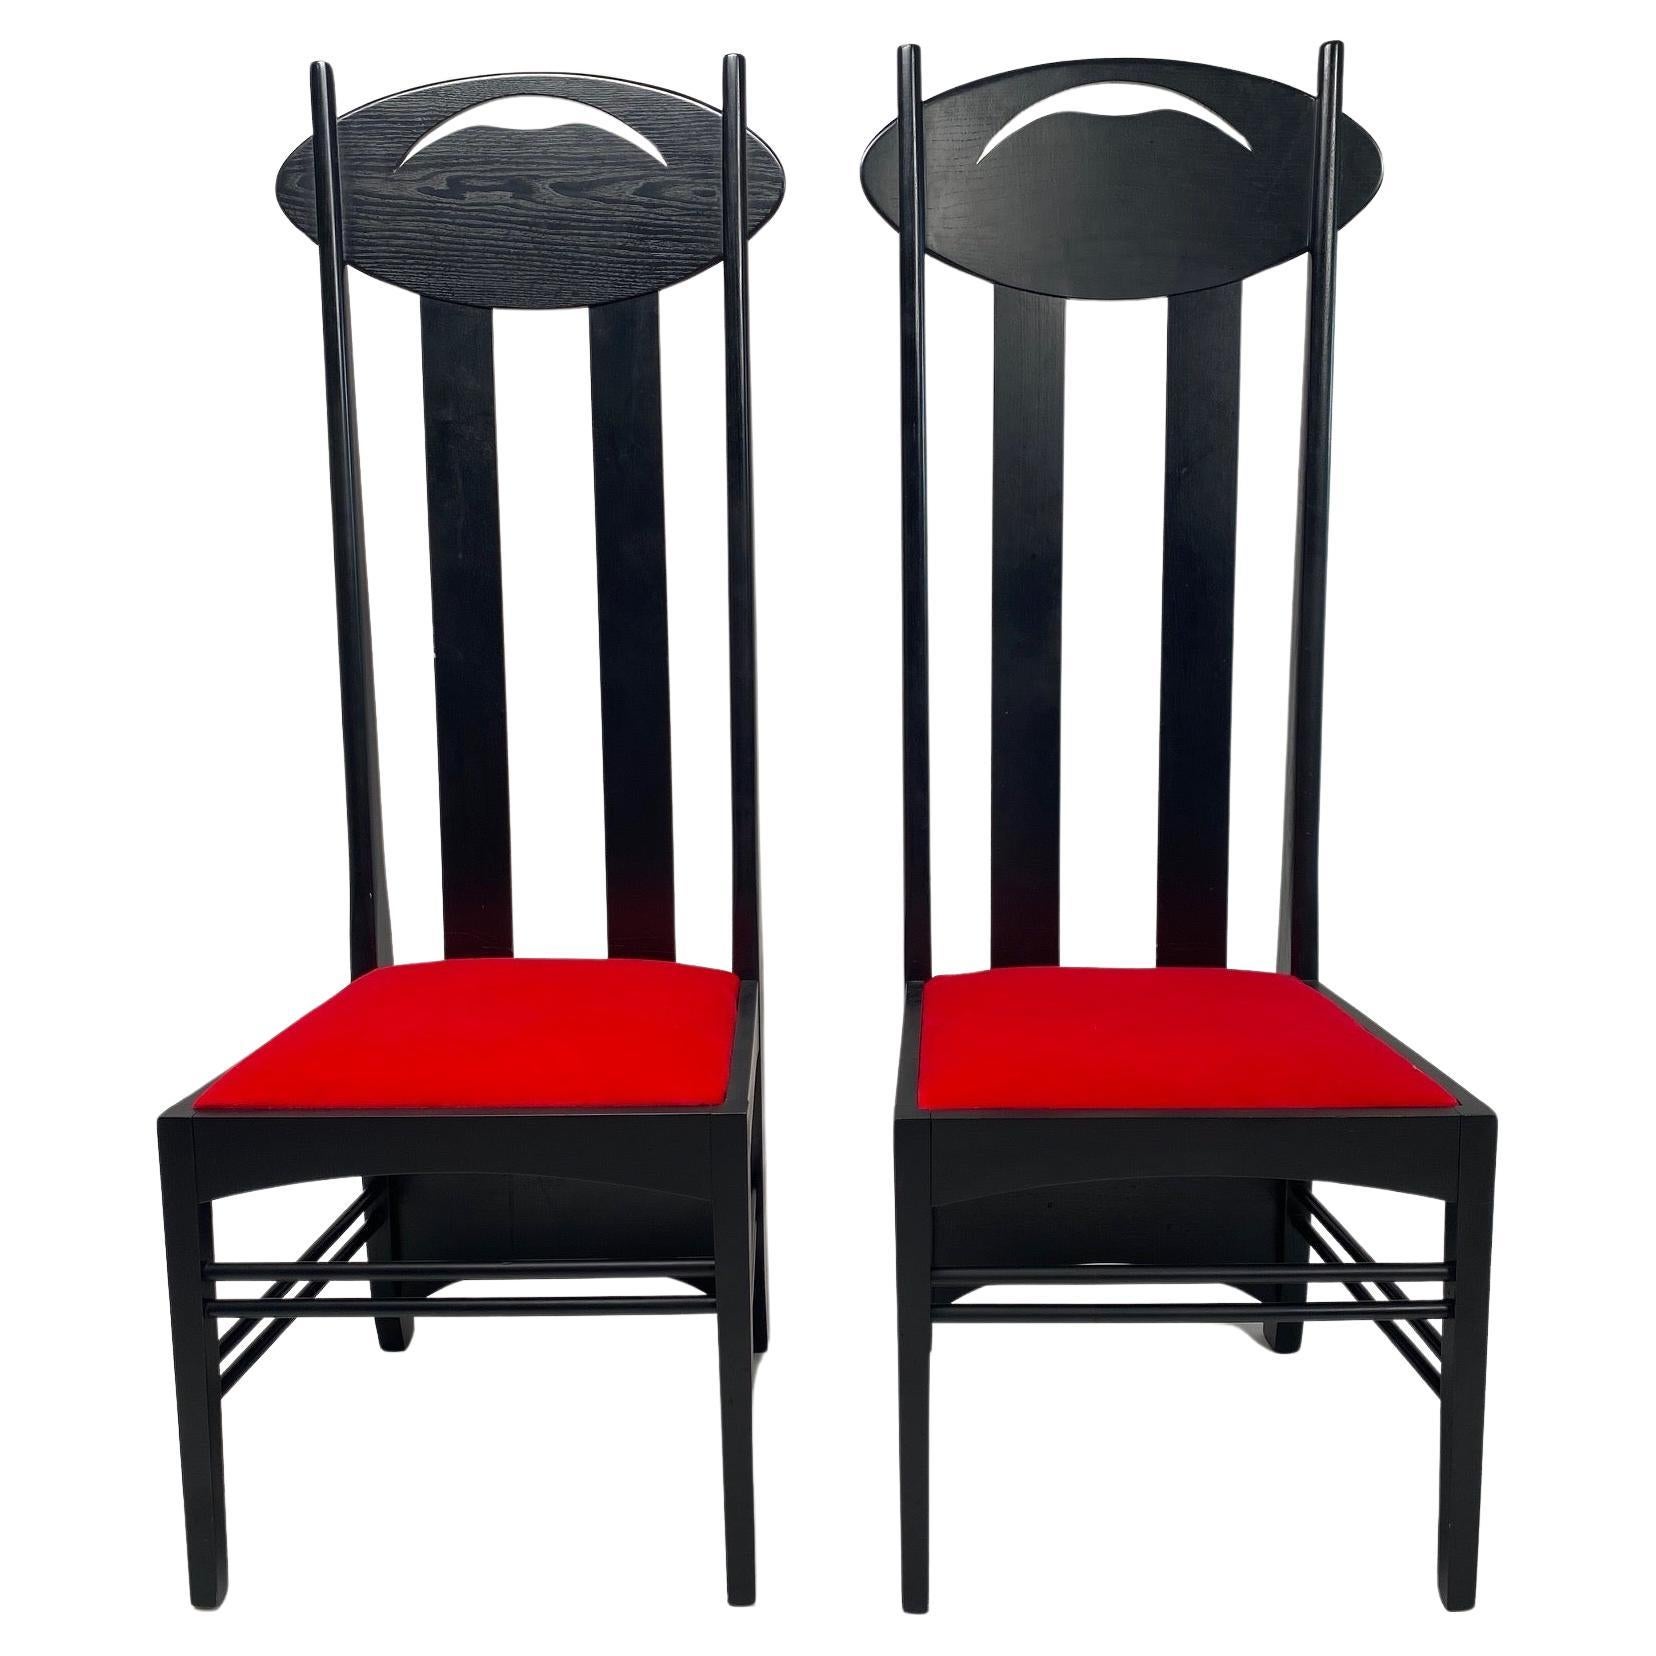 Set of 2 Argyle Chairs by Charles R Mackintosh for Atelier International